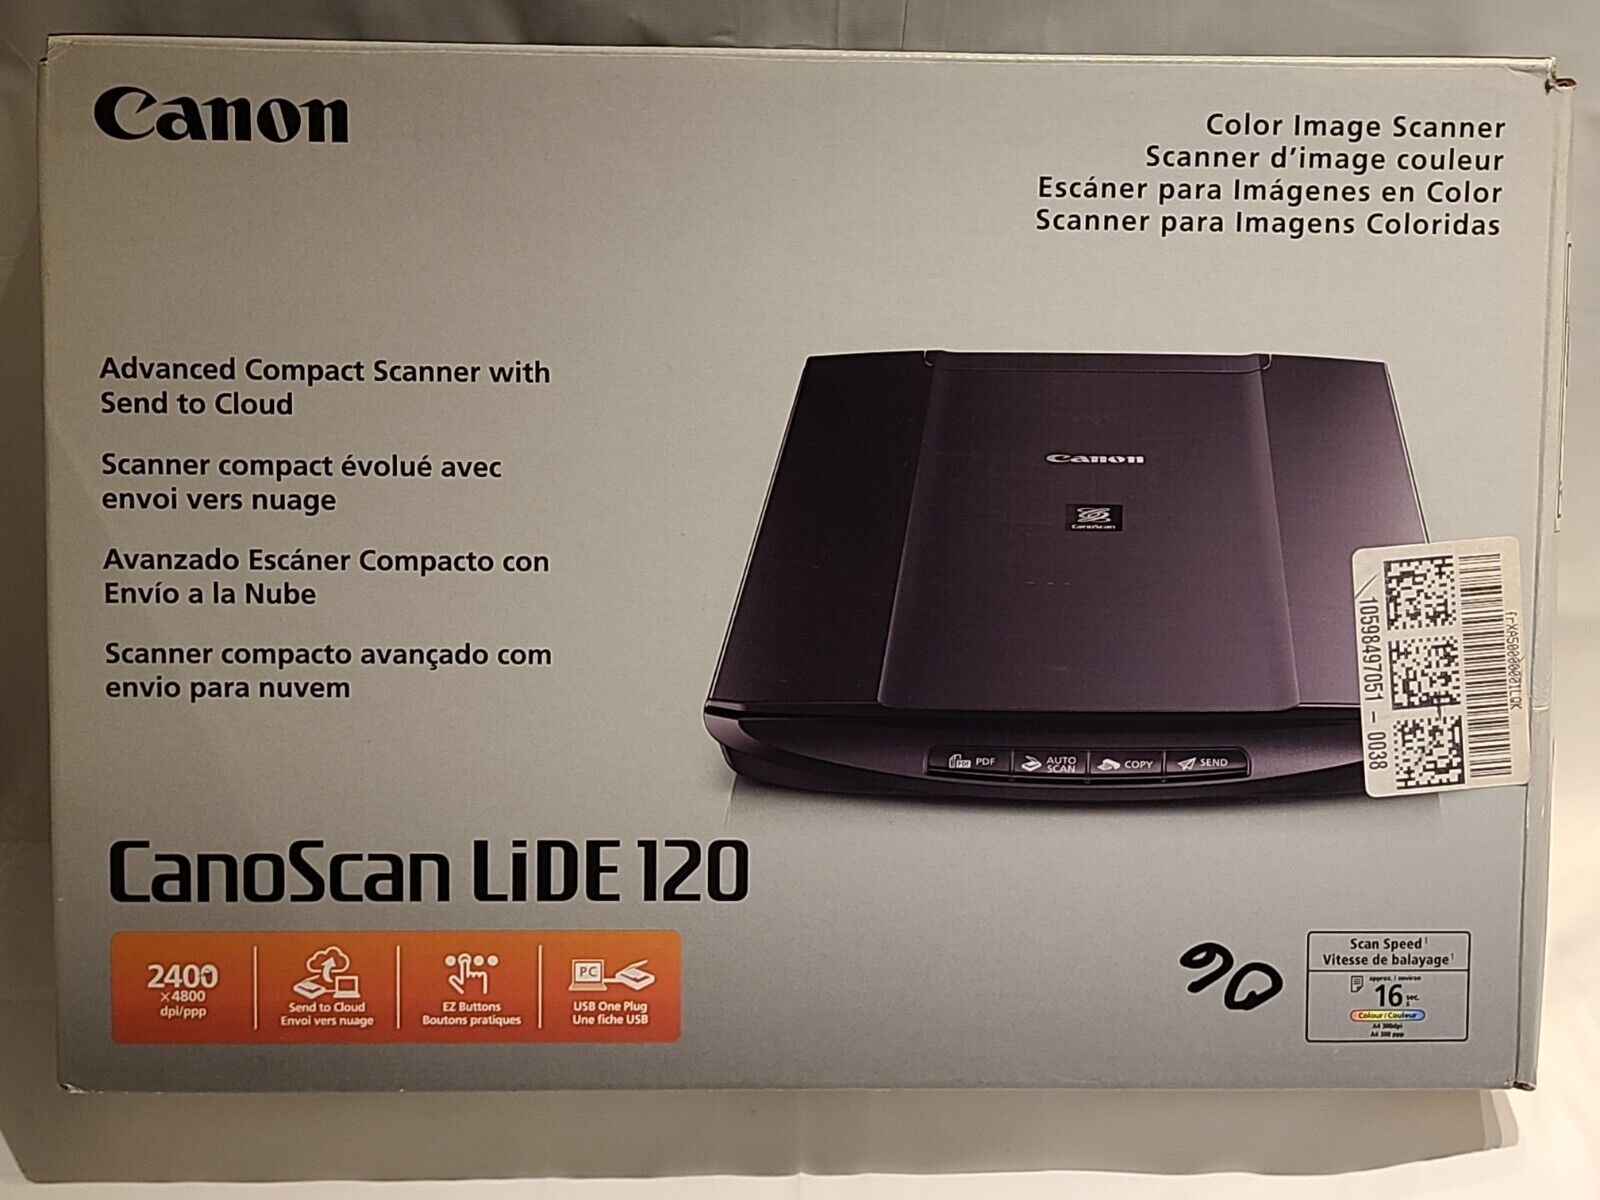 Canon CanoScan LiDE 120 Flatbed Color Image Scanner NEW OPENED BOX 